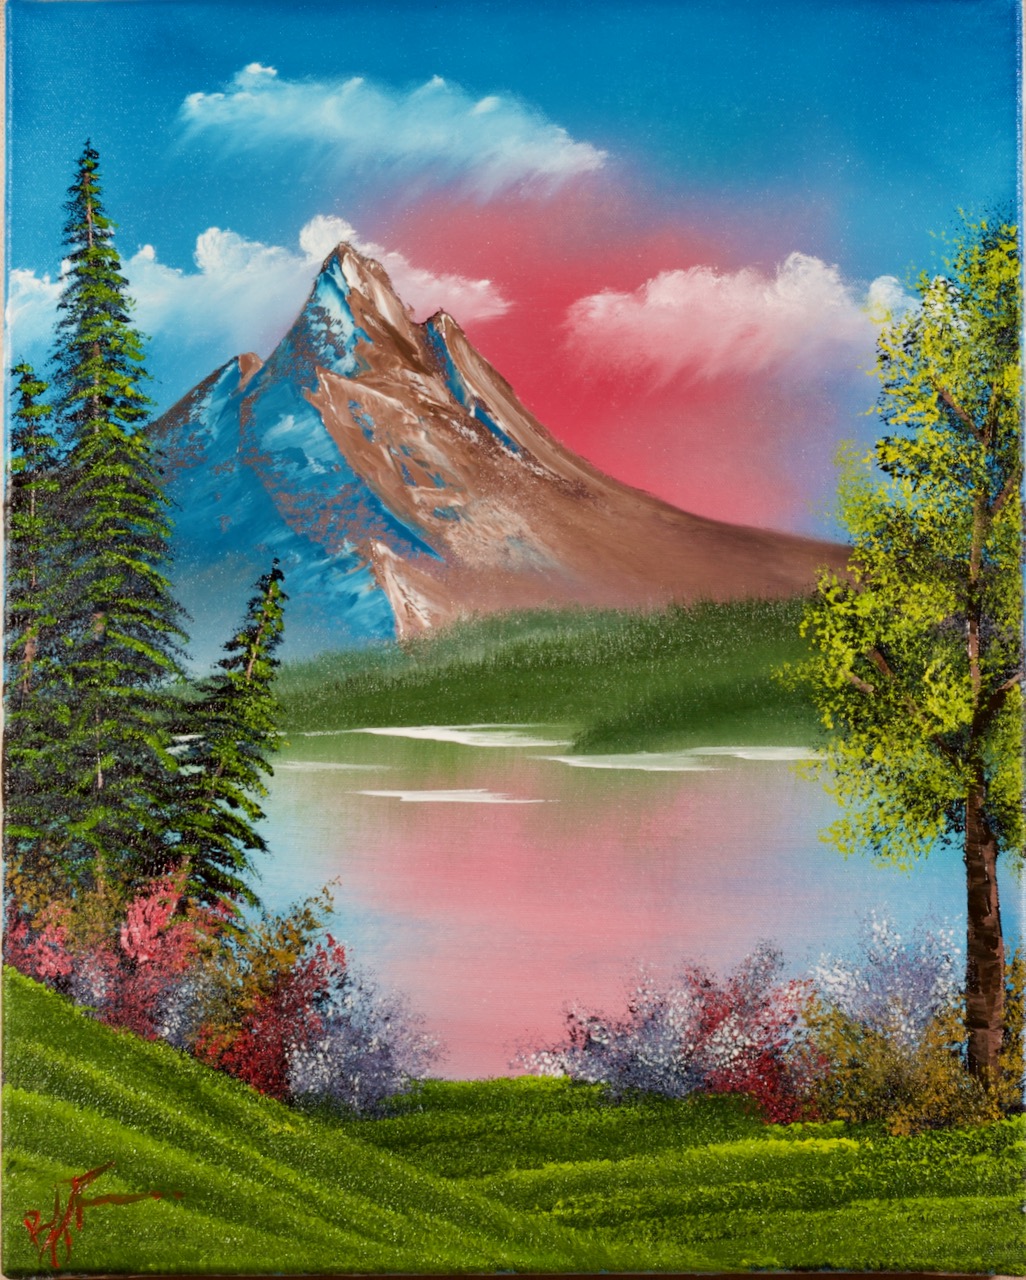 All You Need to Paint Like Bob Ross